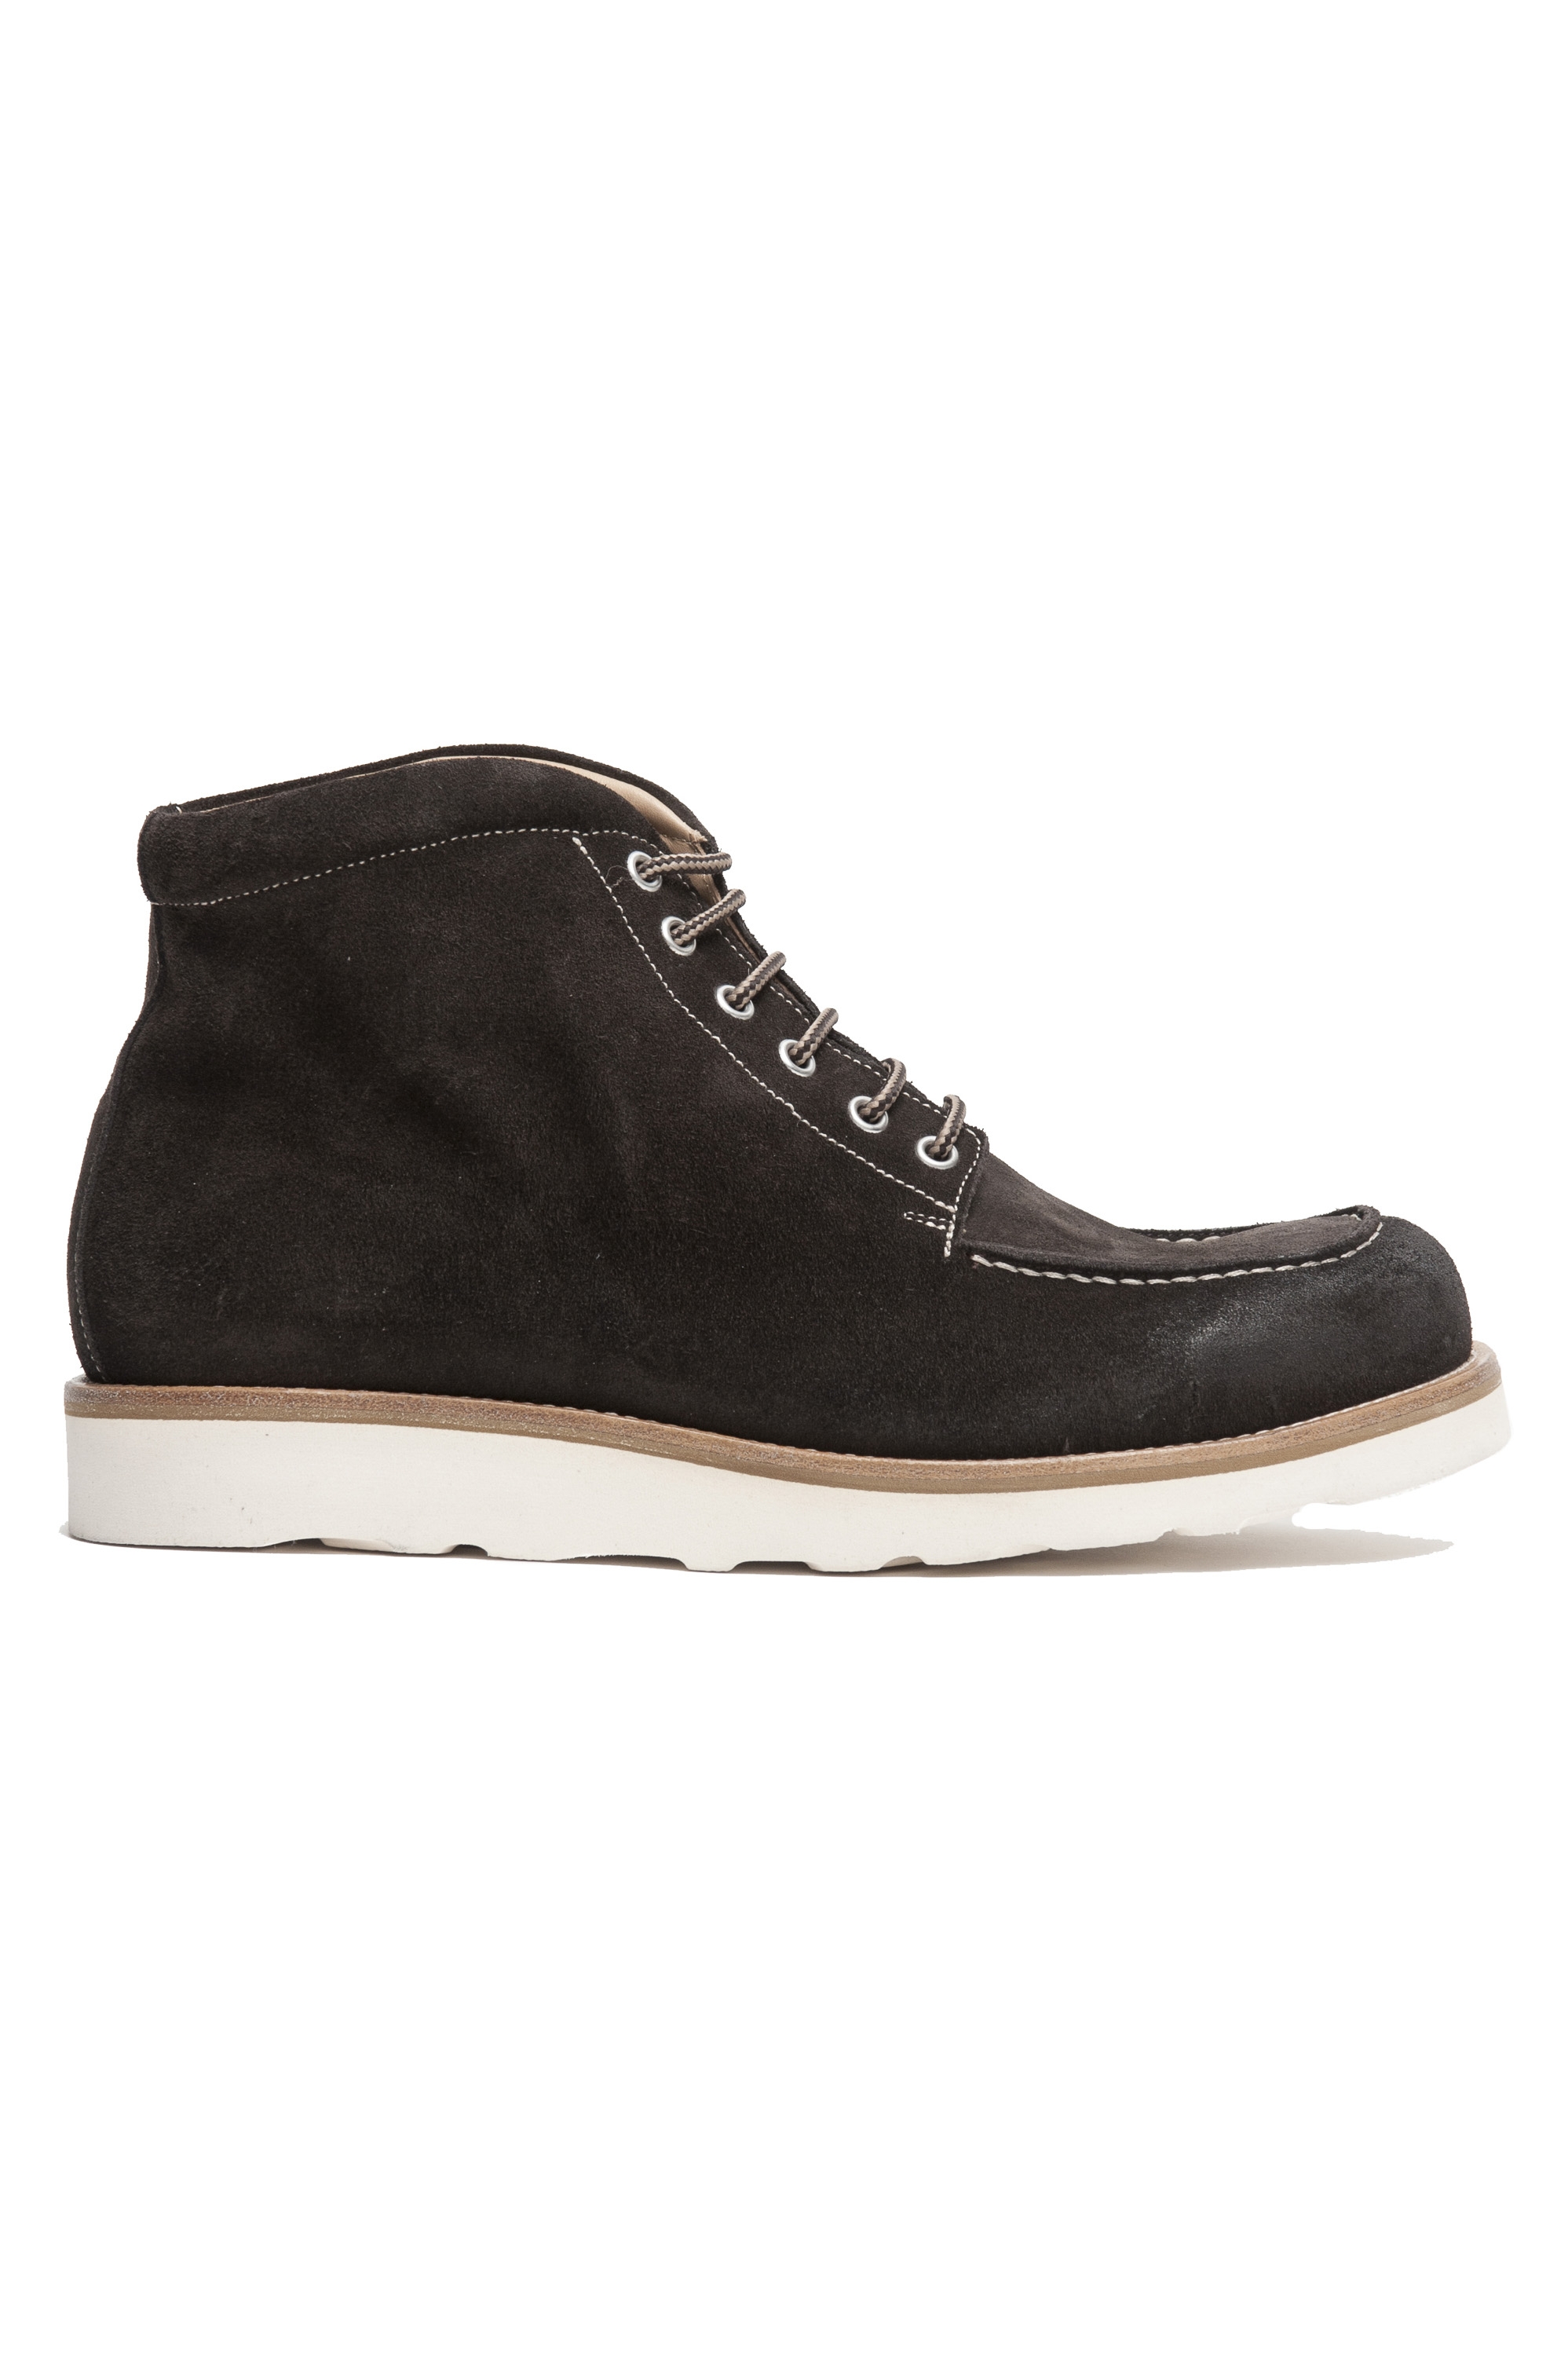 SBU 01917_19AW High top work boots in brown suede leather 01